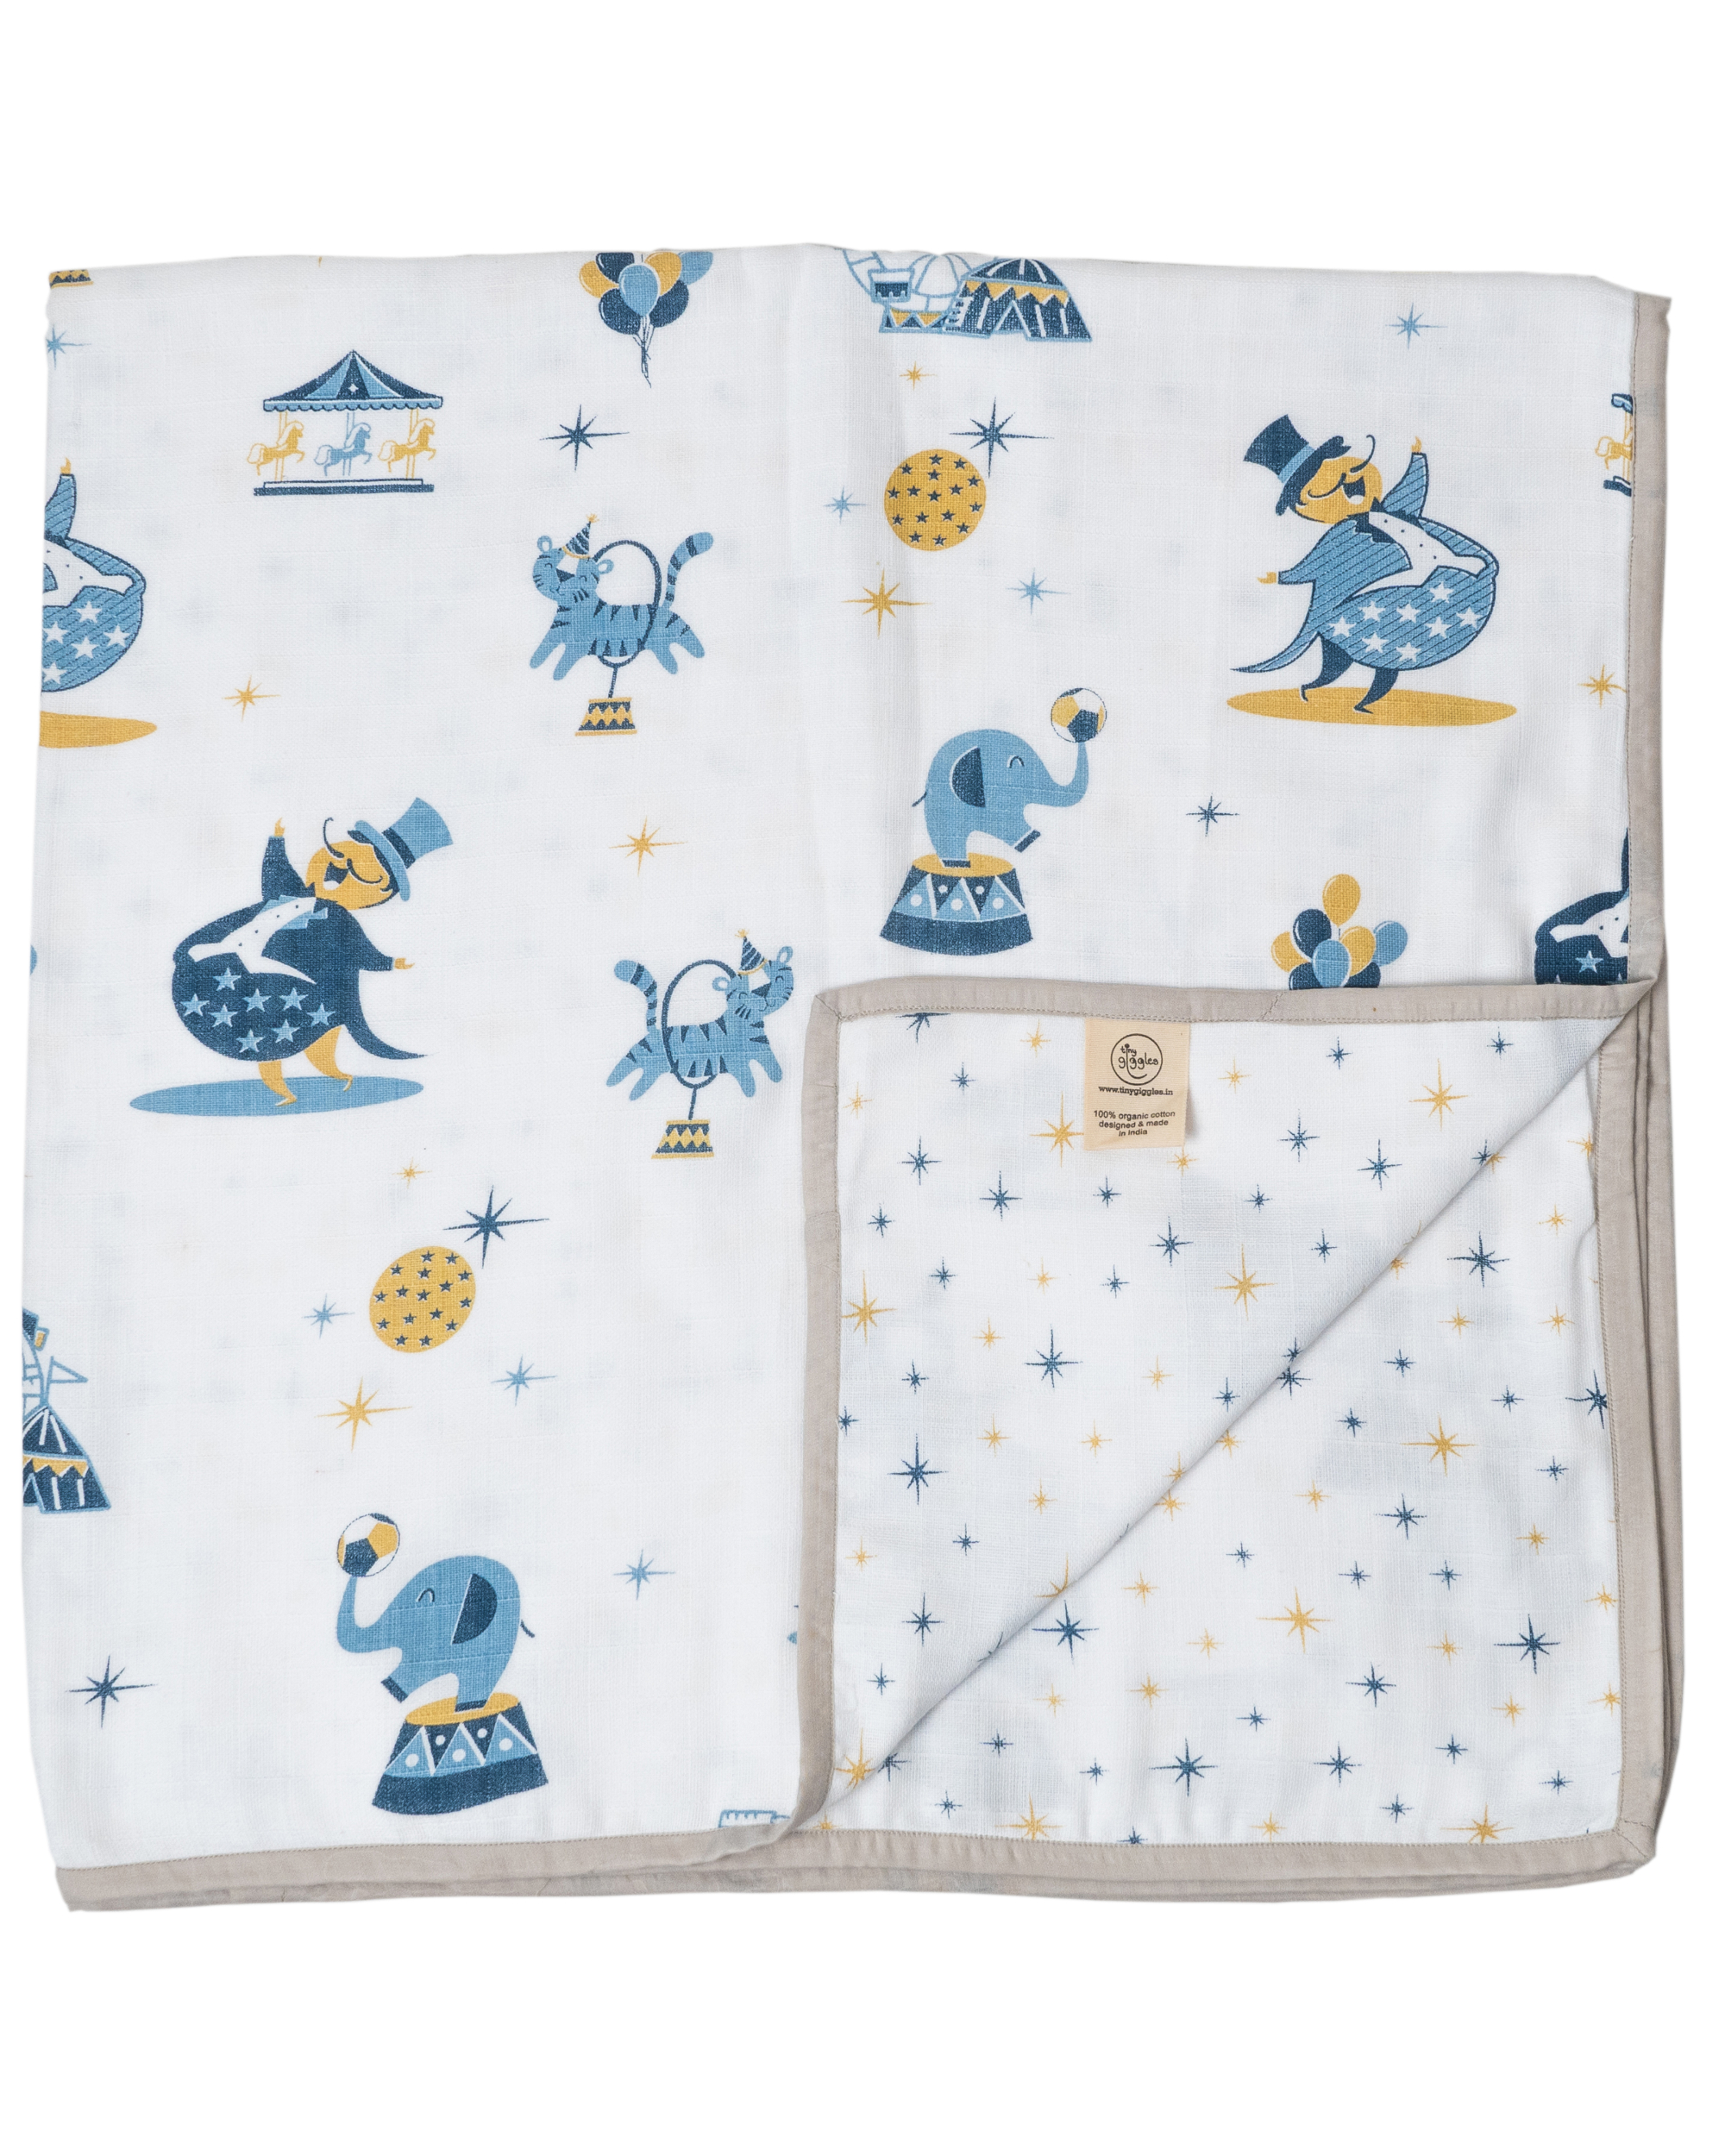 Blue and white  muslin reversible blanket